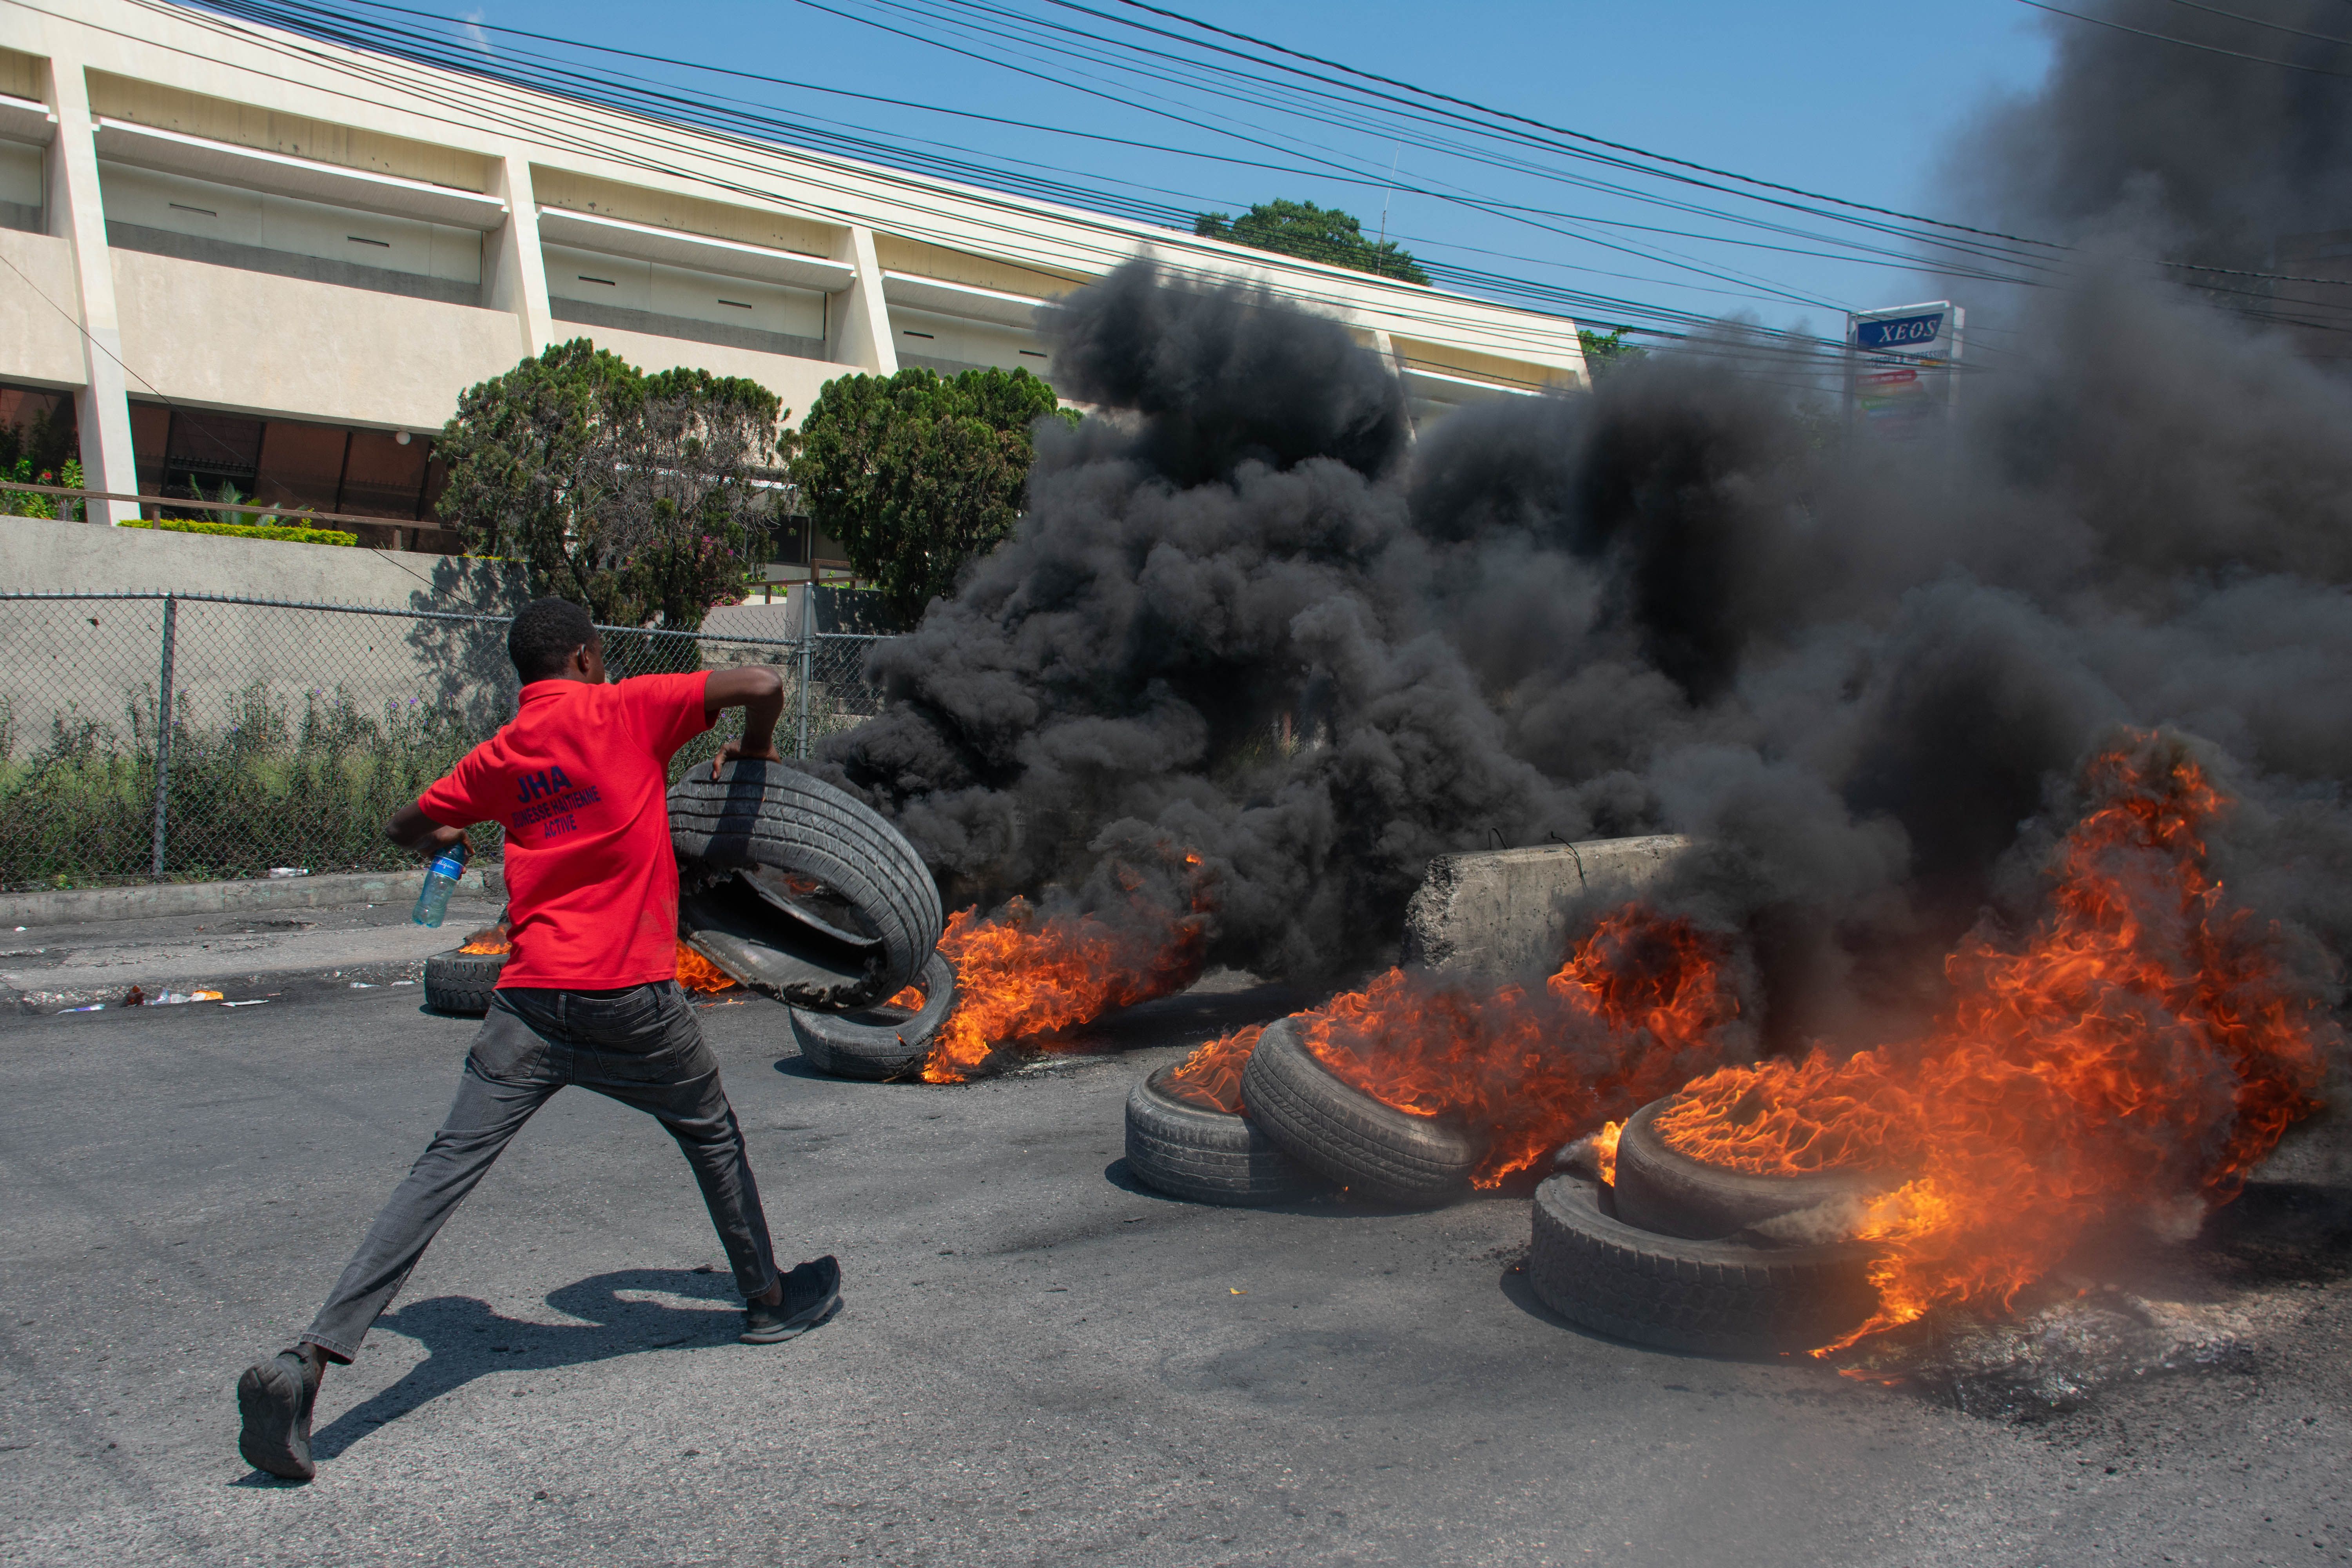 A protester burns tires during a demonstration following the resignation of its Prime Minister Ariel Henry, in Port-au-Prince, Haiti, on March 12